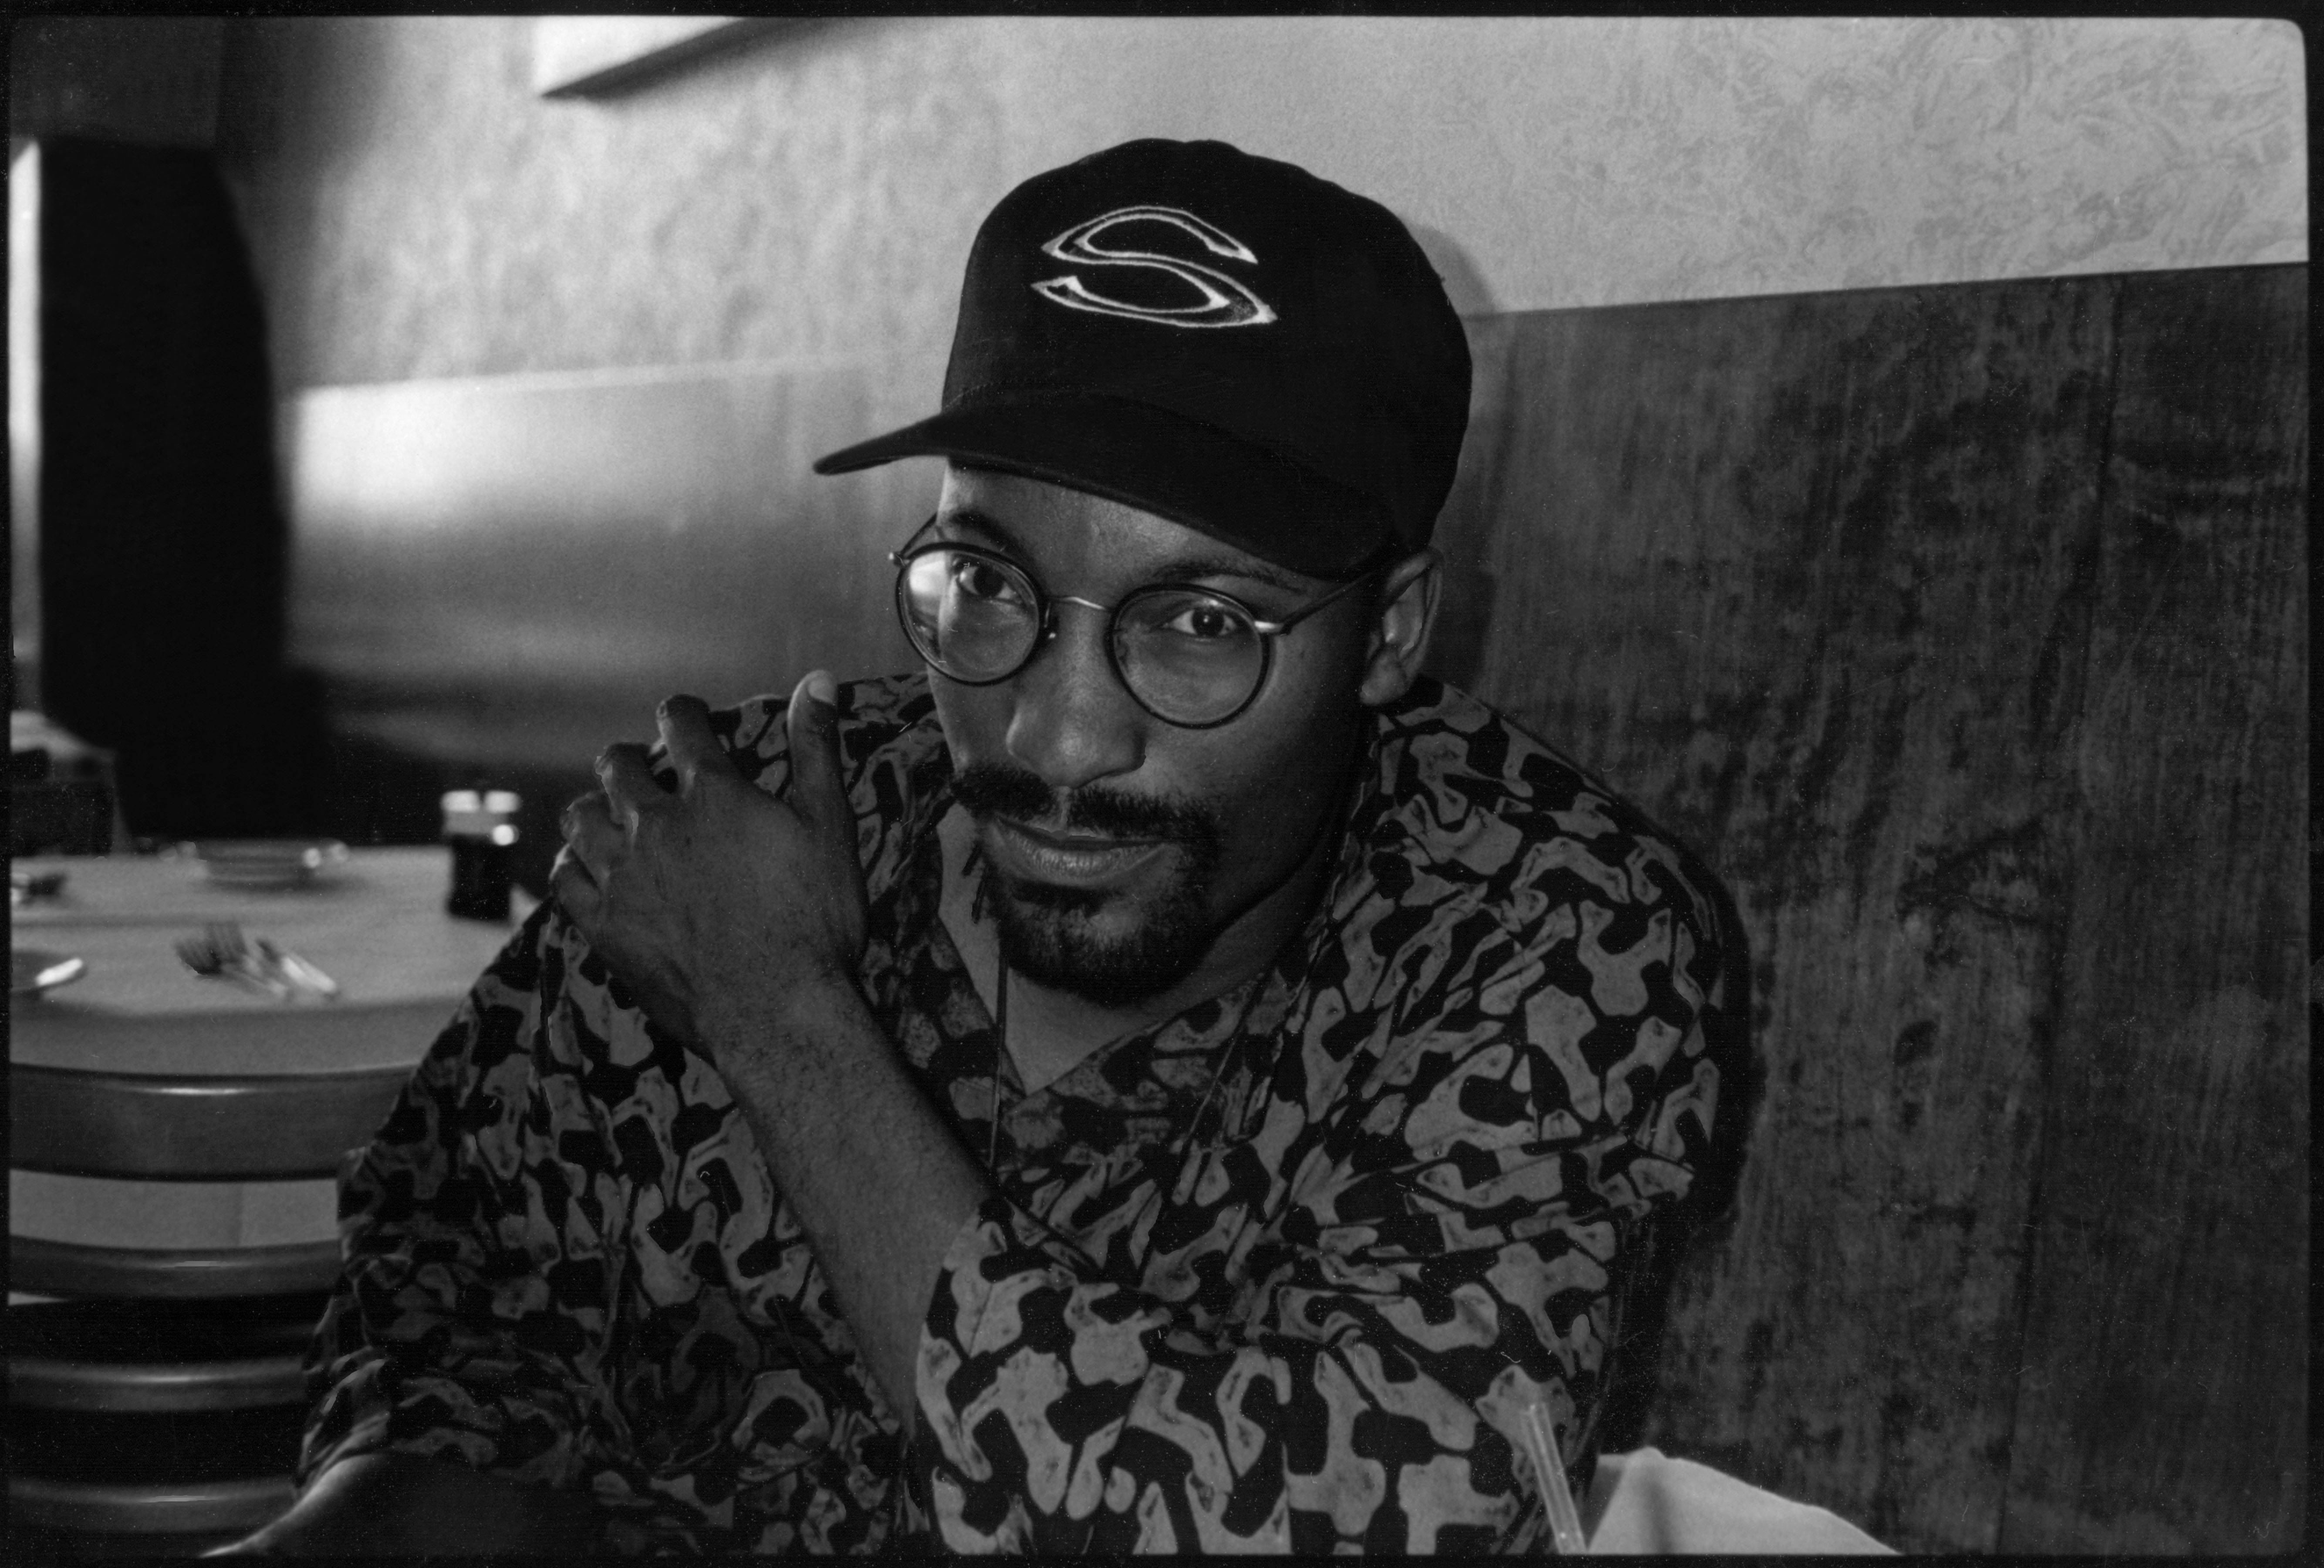 Portrait of American film director John Singleton, Los Angeles, California, late 1980s or early 1990s. (Photo by Anthony Barboza/Getty Images)